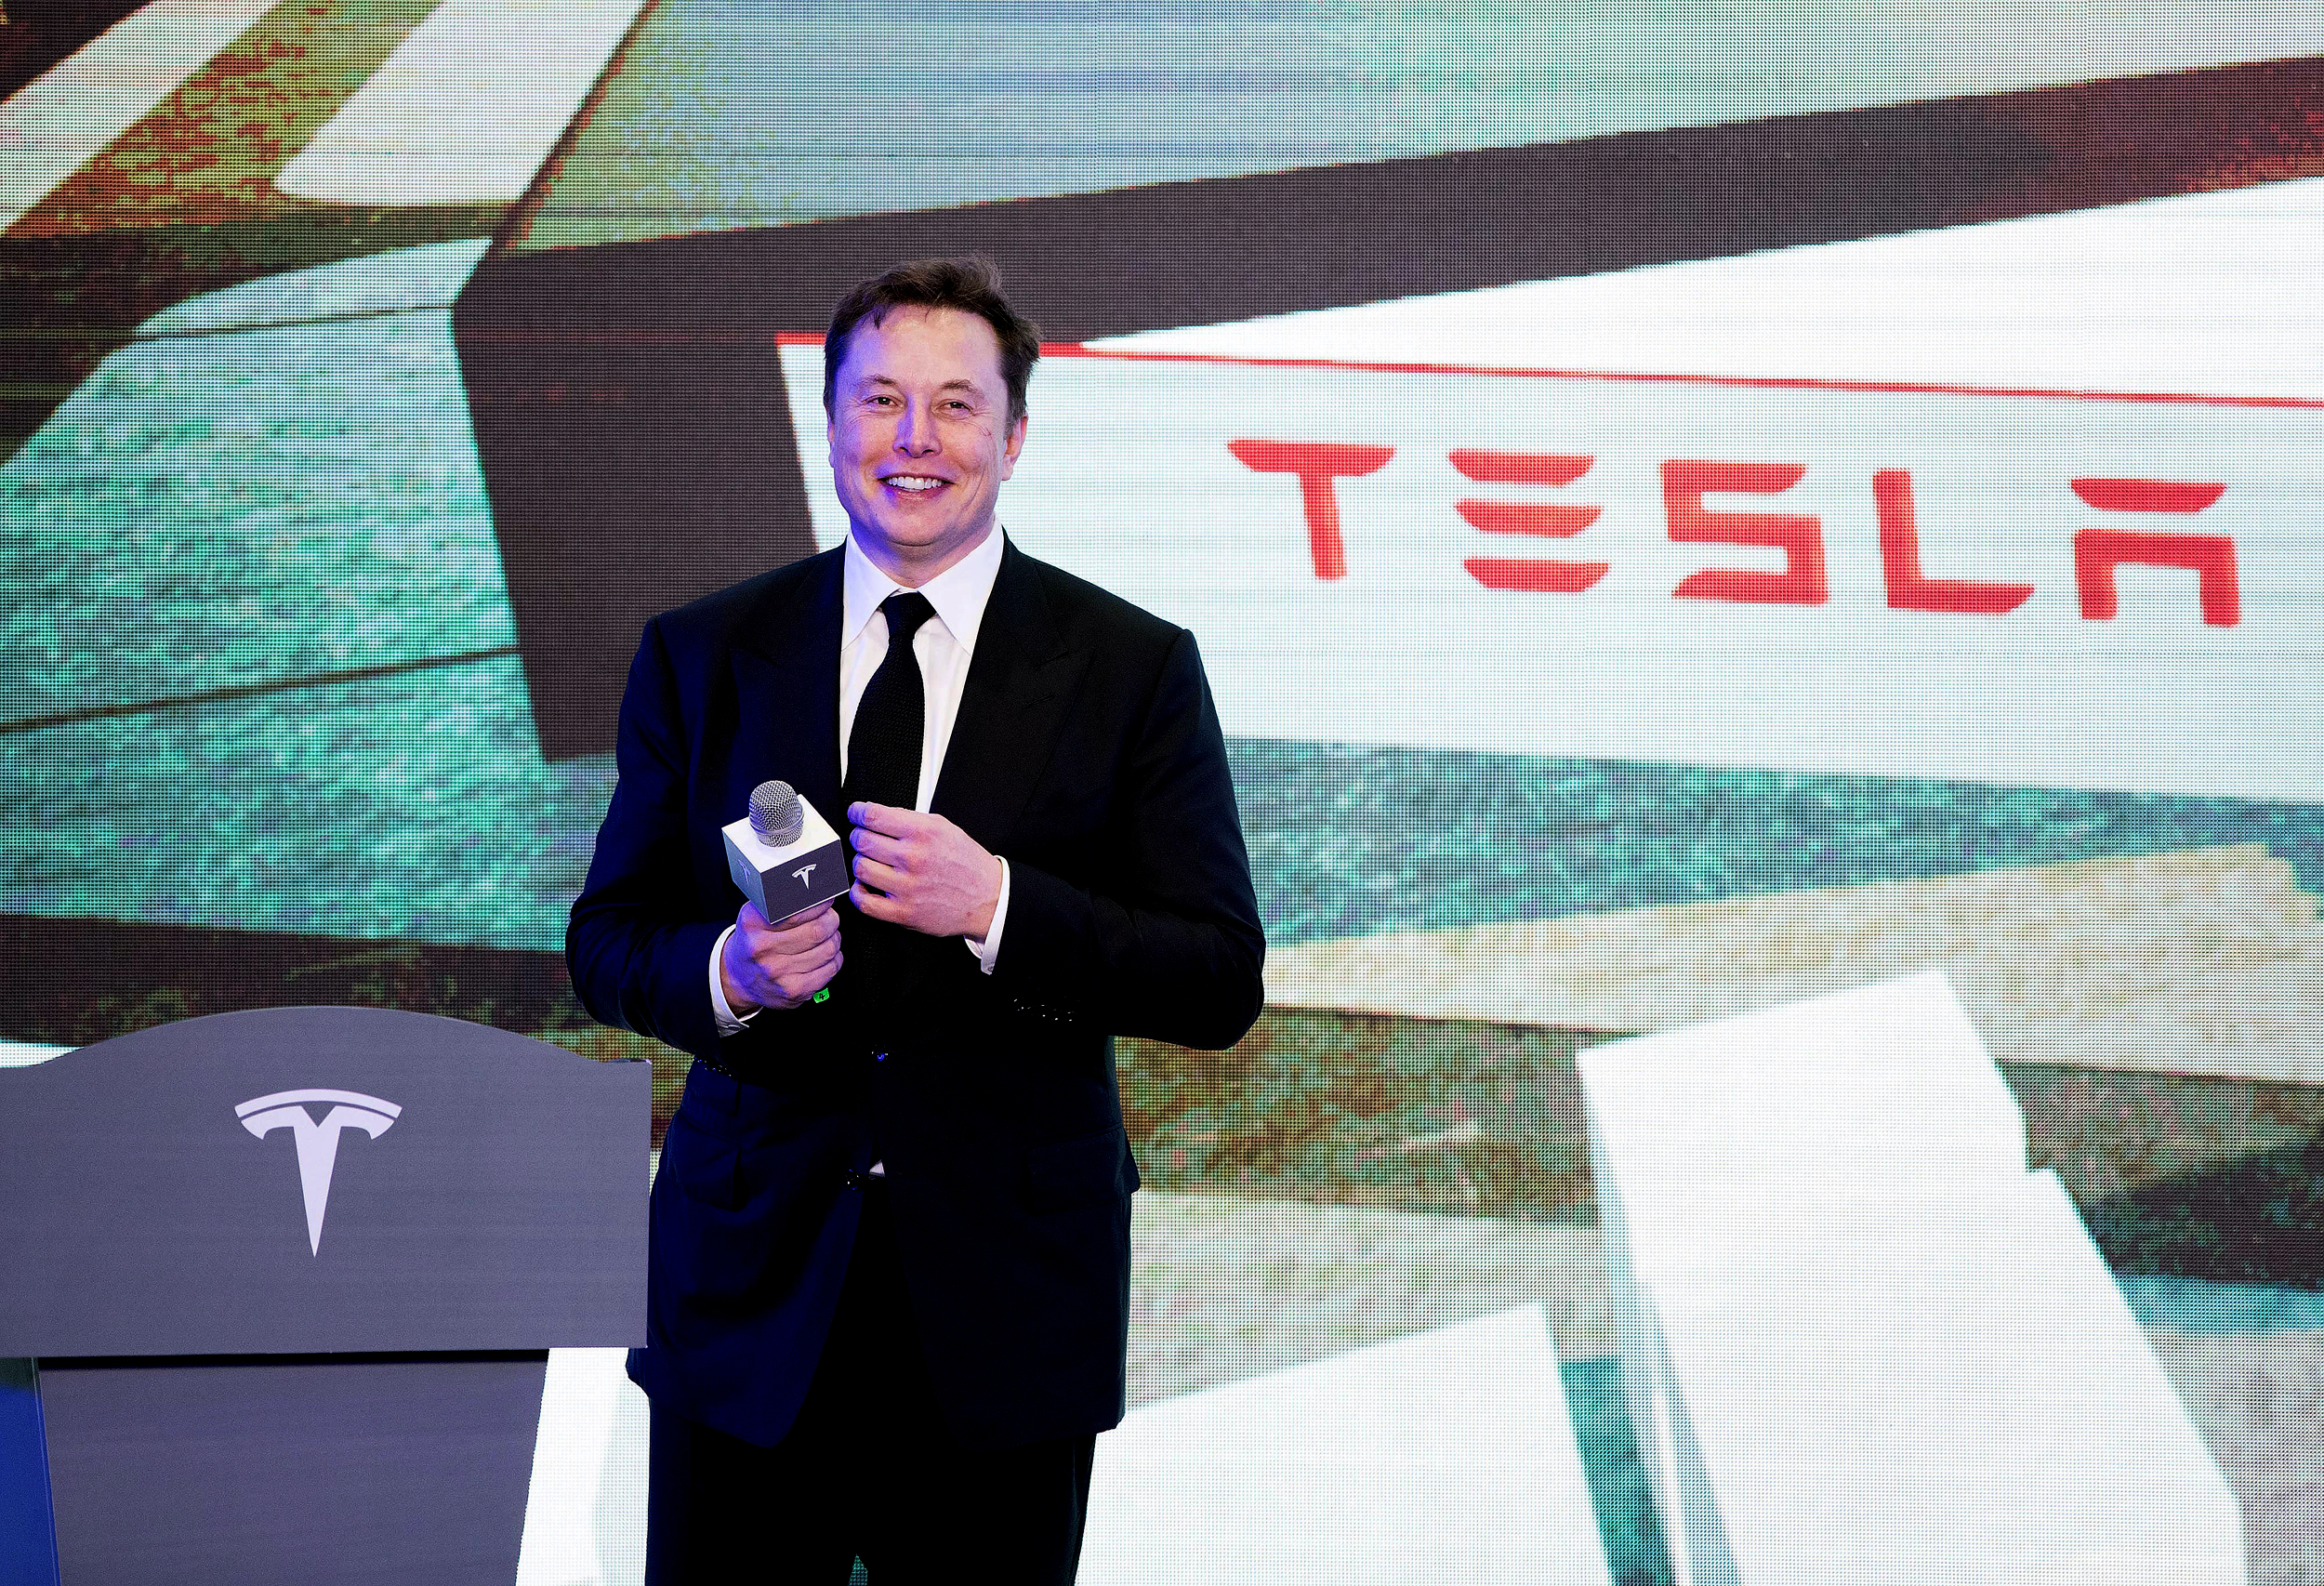 Elon Musk attends an opening ceremony for Tesla China-made Model Y program in Shanghai, China, on Jan. 7, 2020. (Photo by Ding Ting/Xinhua via Getty) (Xinhua/Ding Ting via Getty Images)